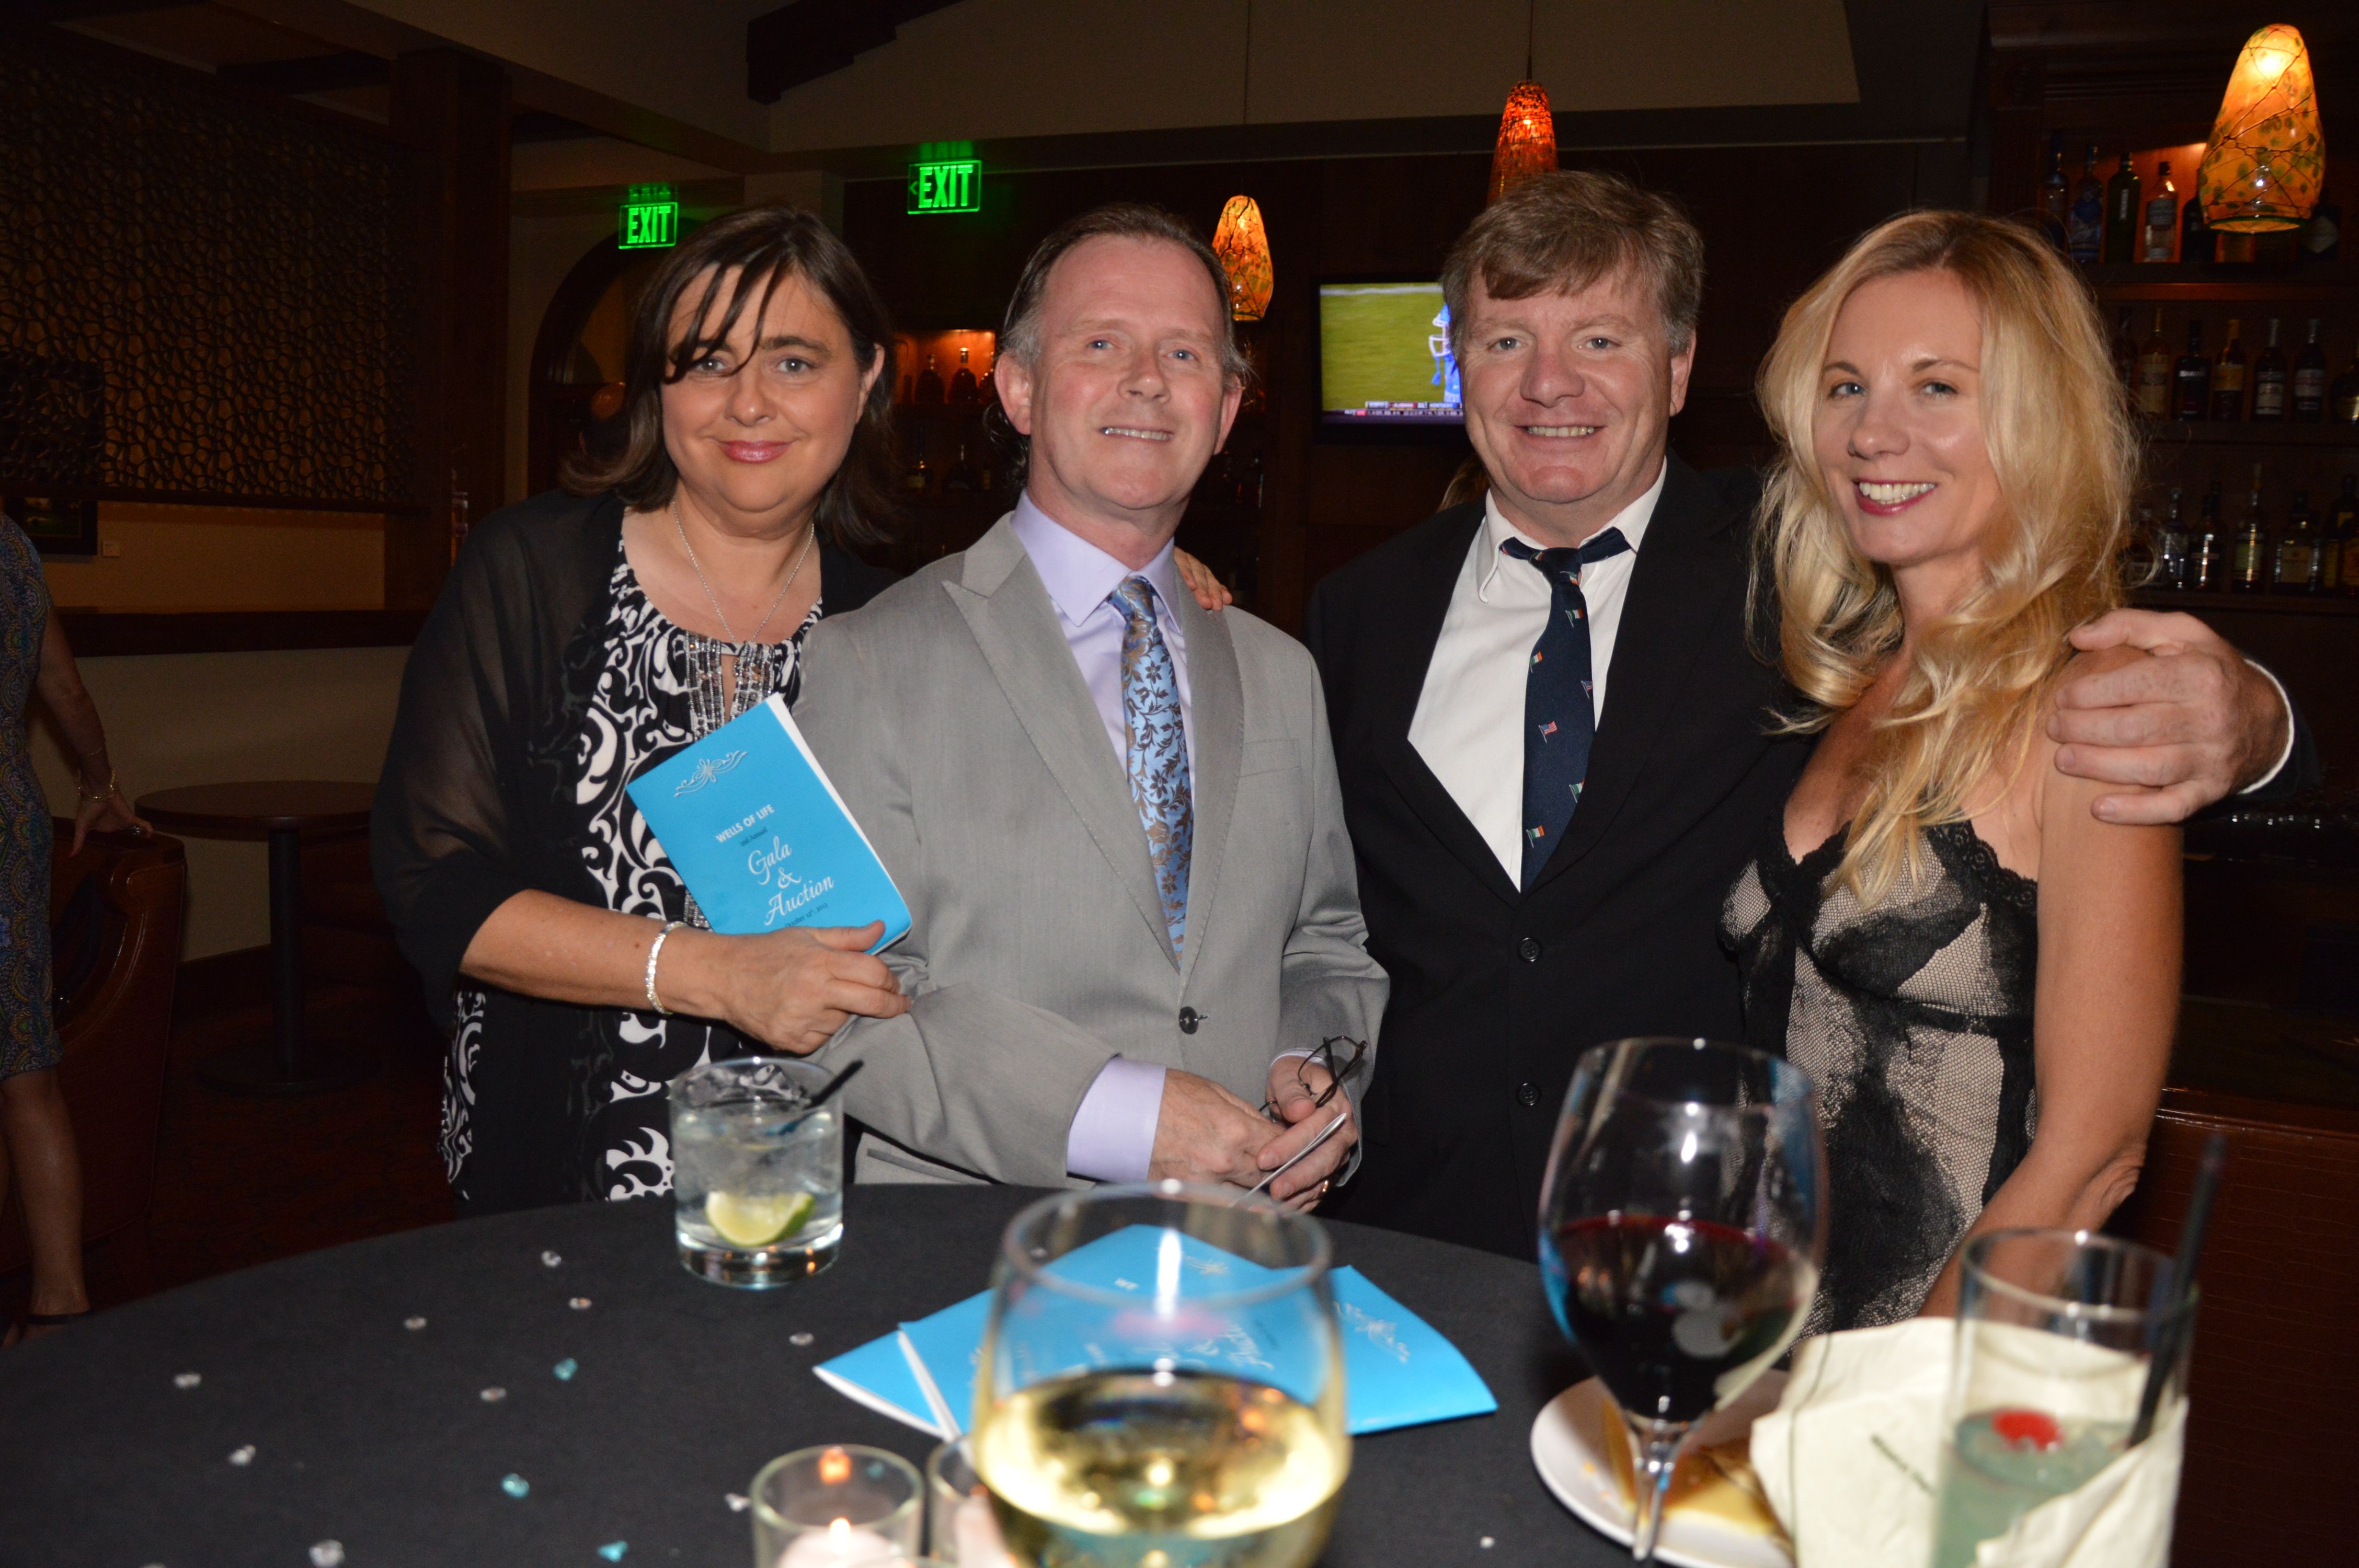 Restaurateur’s  Jean and Darren Coyle, owner of Wine Works and Dublin Four; with Eugene Gallagher, well donor and film producer Mary Patel of Long Beach.